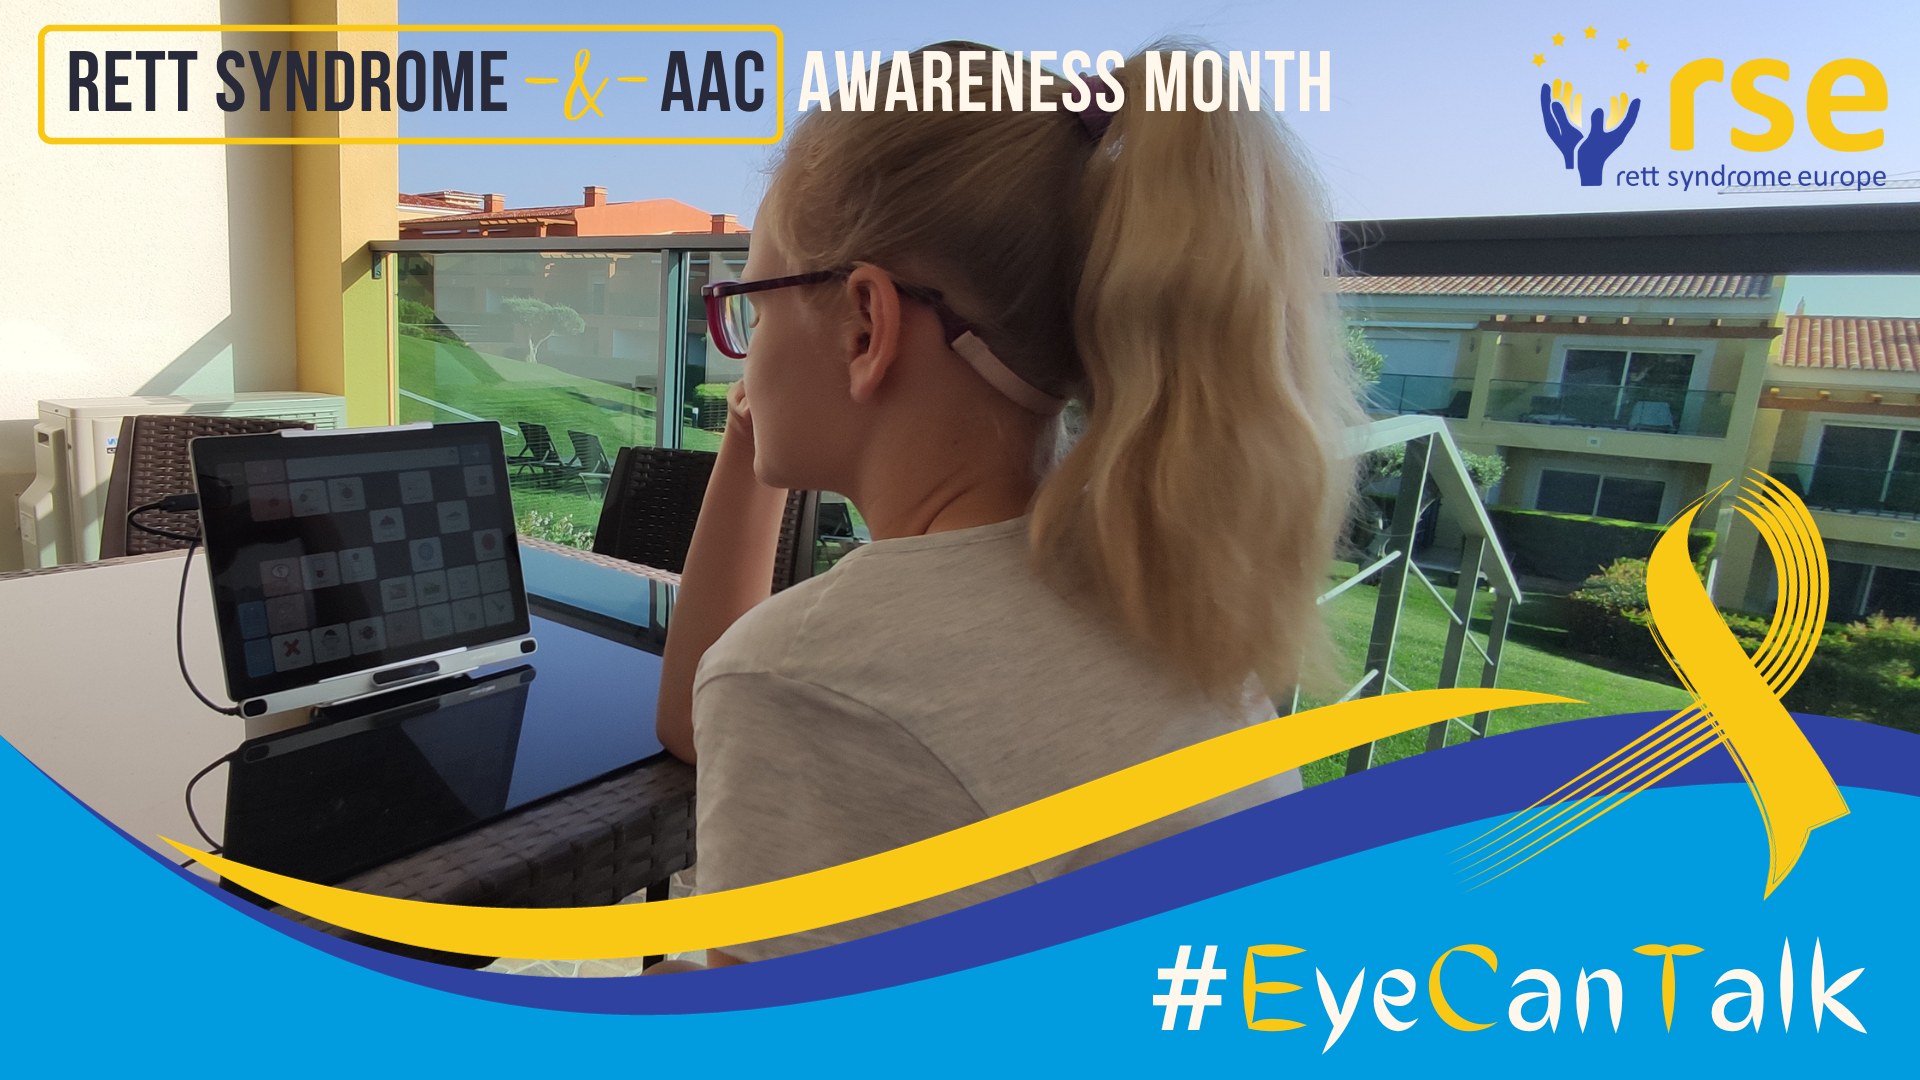 #EyeCanTalk – Rett syndrome and AAC awareness month